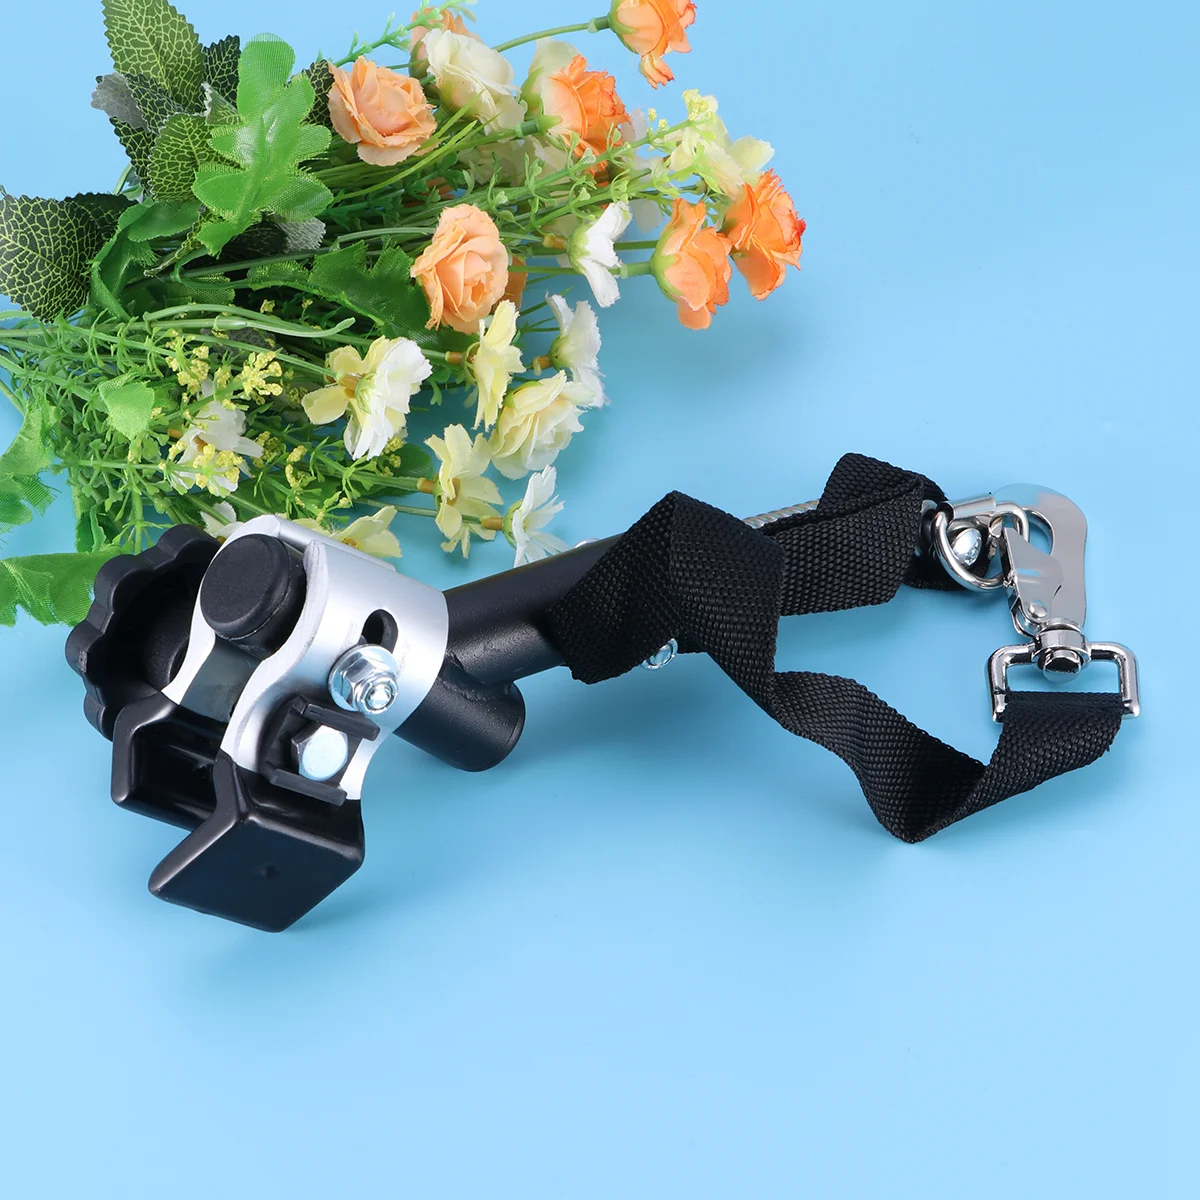 

Bike Trailer Hitch Coupler Connector Attachment Adapterbicycle Kids Trailers Instep Cargo Partsaccessory Assembly Adult Child